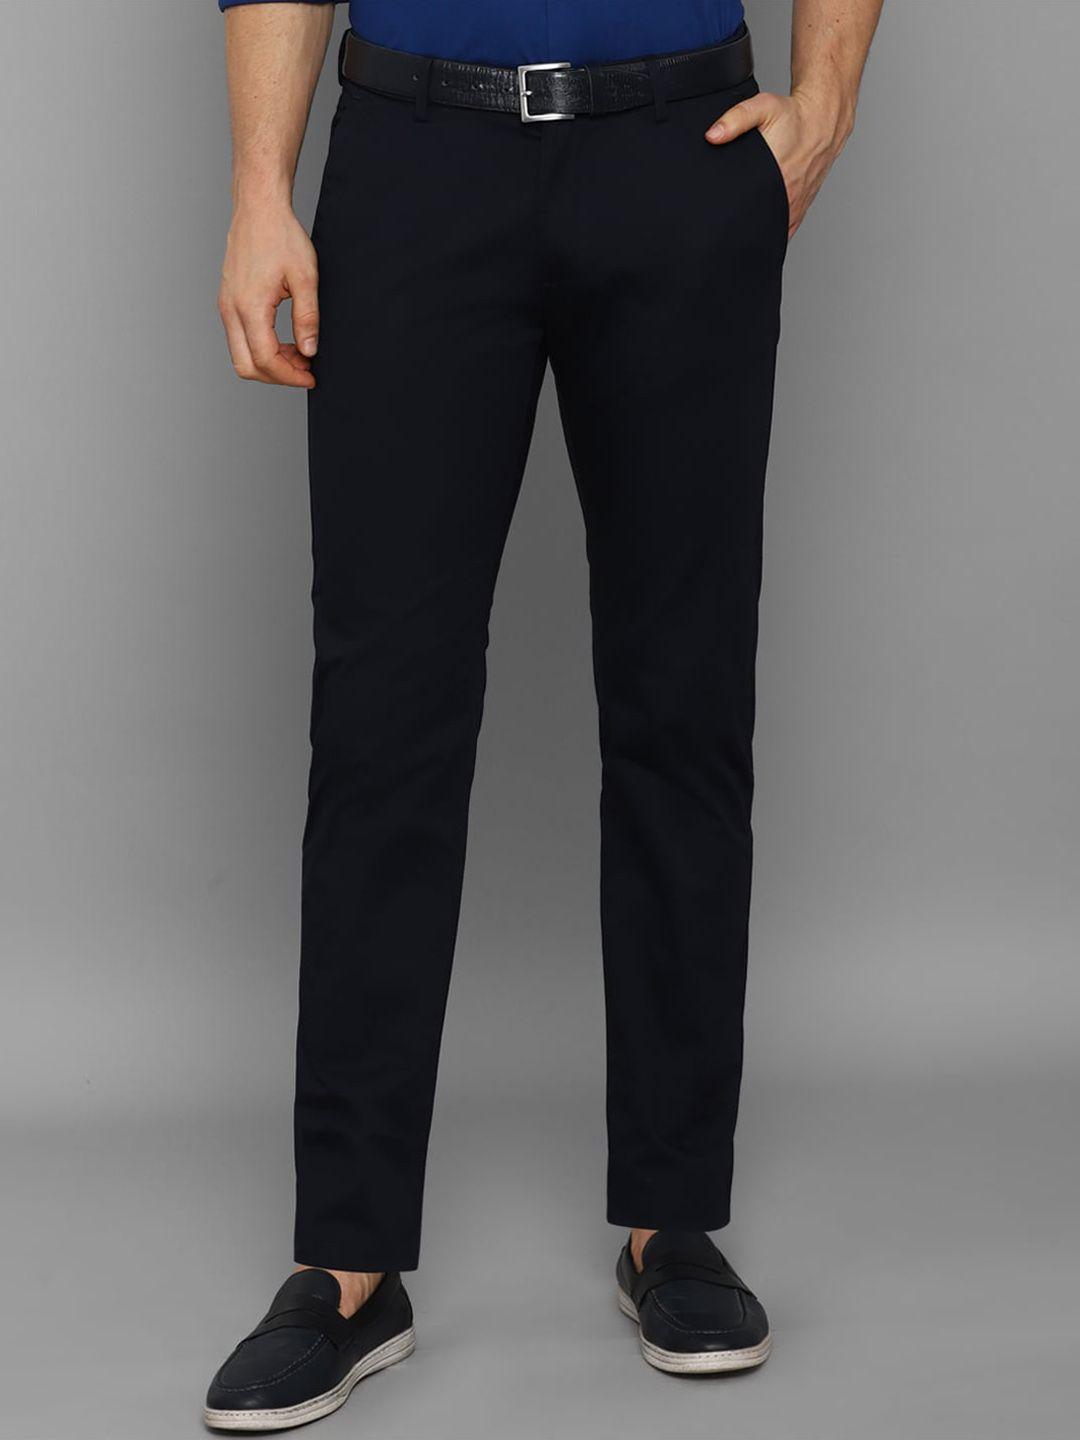 allen solly men black slim fit chinos casual trousers